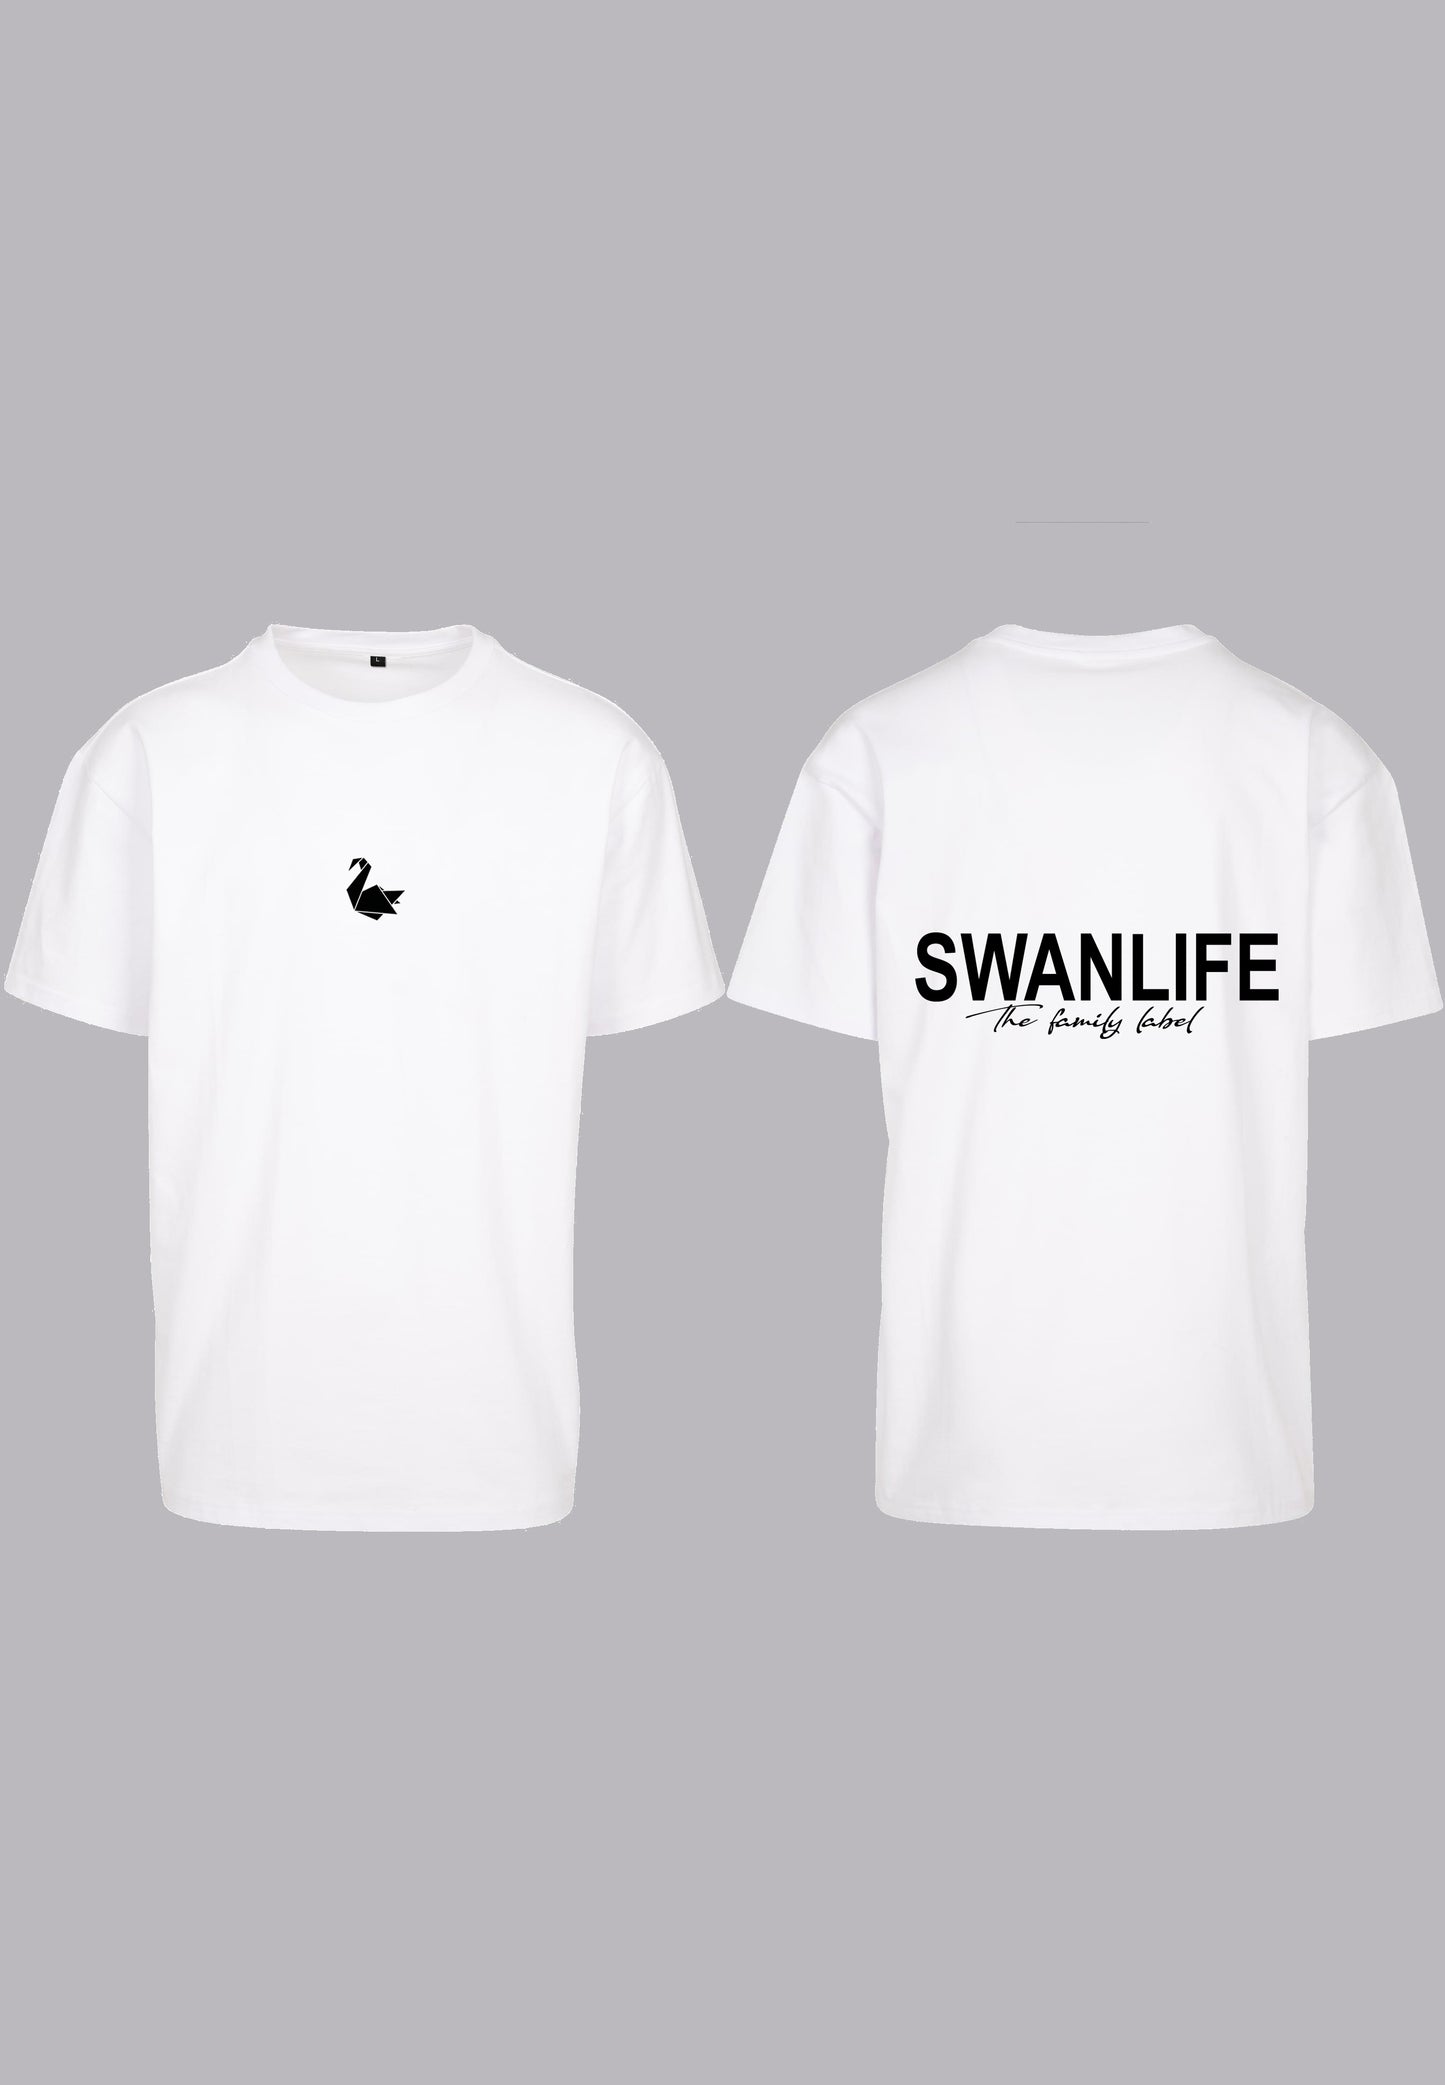 Swanlife Oversized Tee 'The Family Label' - White/Black - Swanlife Fashion